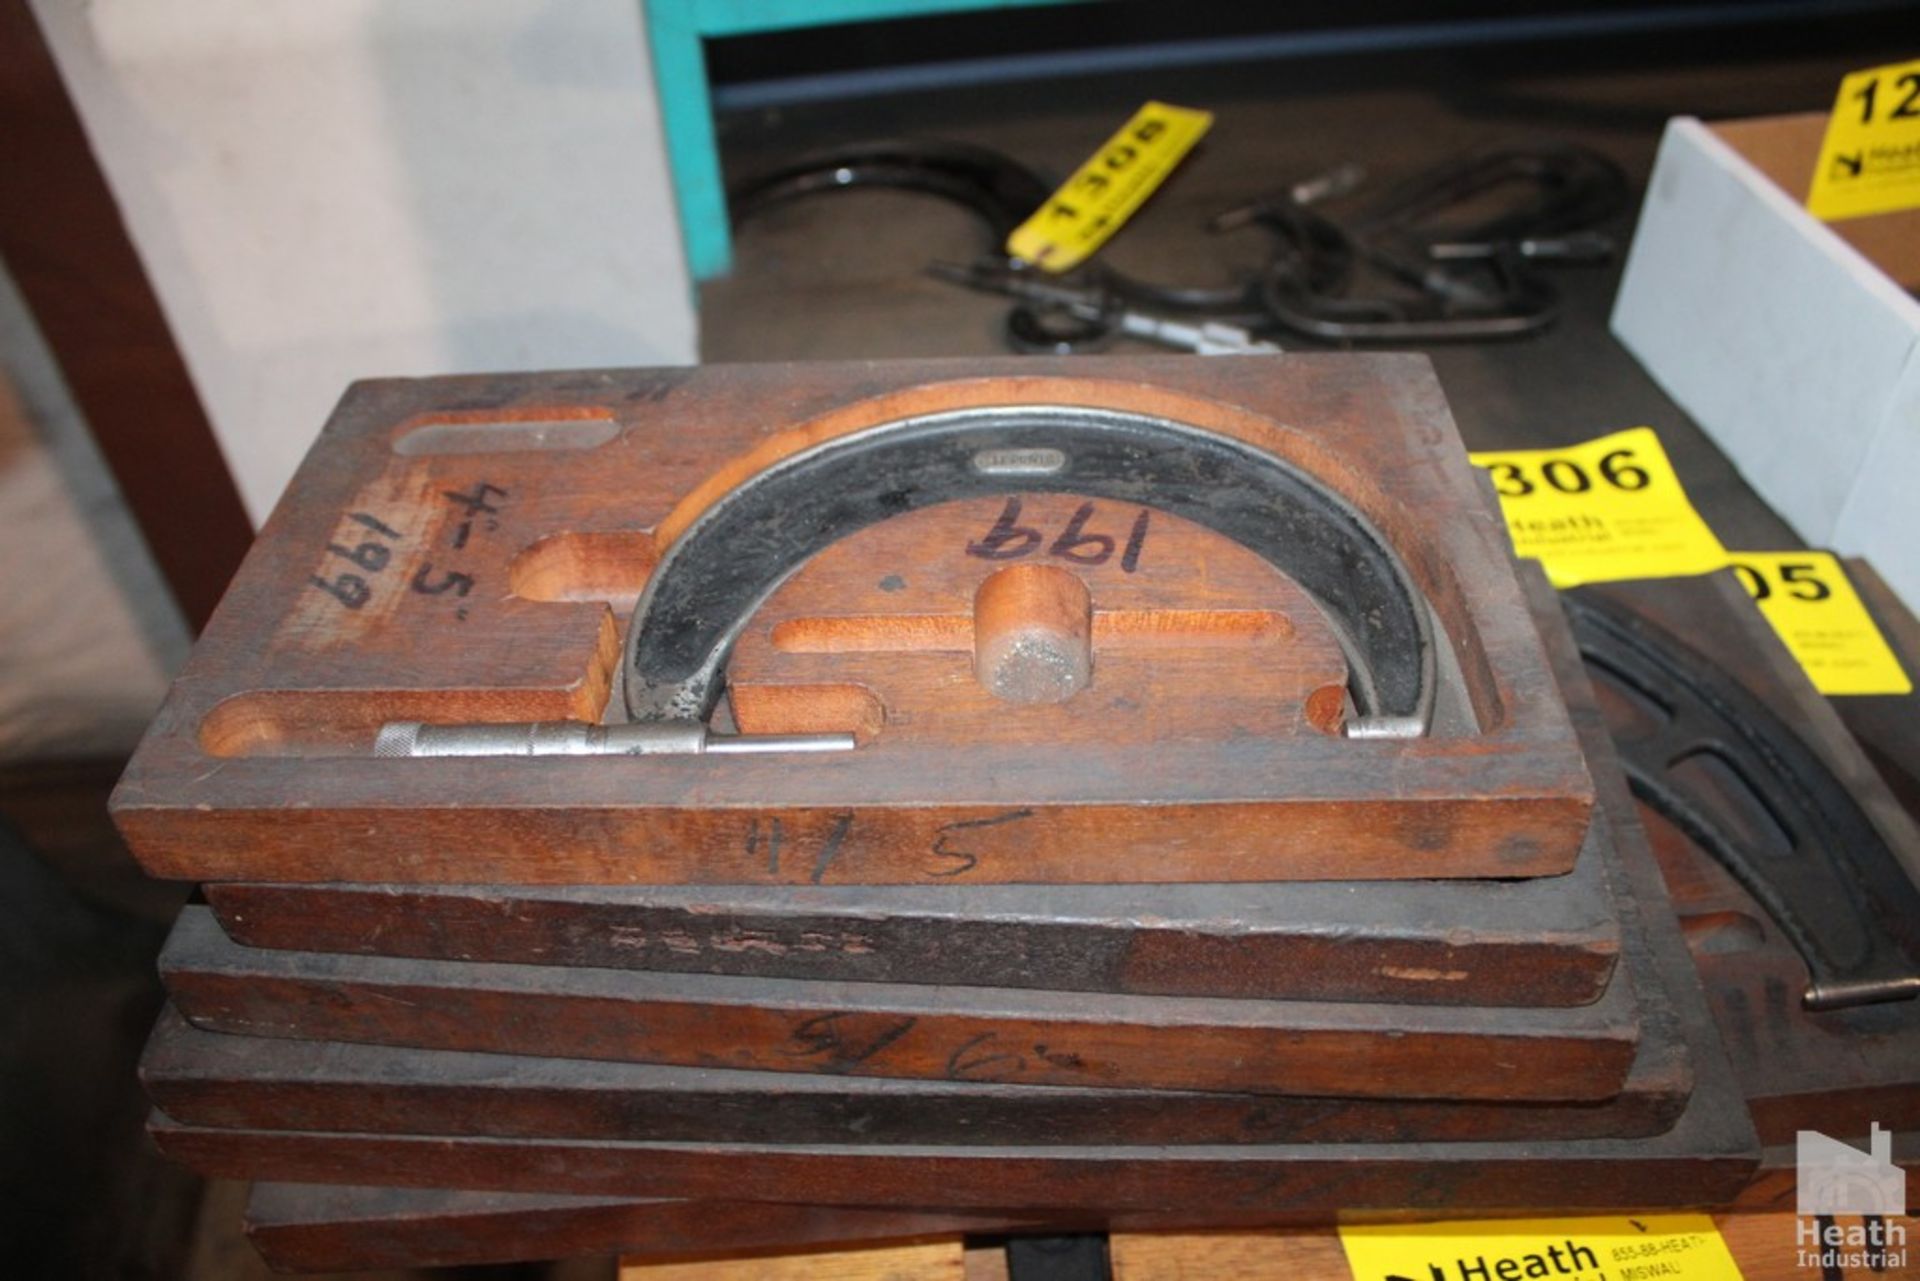 SIX PIECE MICROMETER SET 7"-8" TO 3"-4" (FIVE ARE STARRETT, ONE IS BROWN & SHARPE) - Image 2 of 4